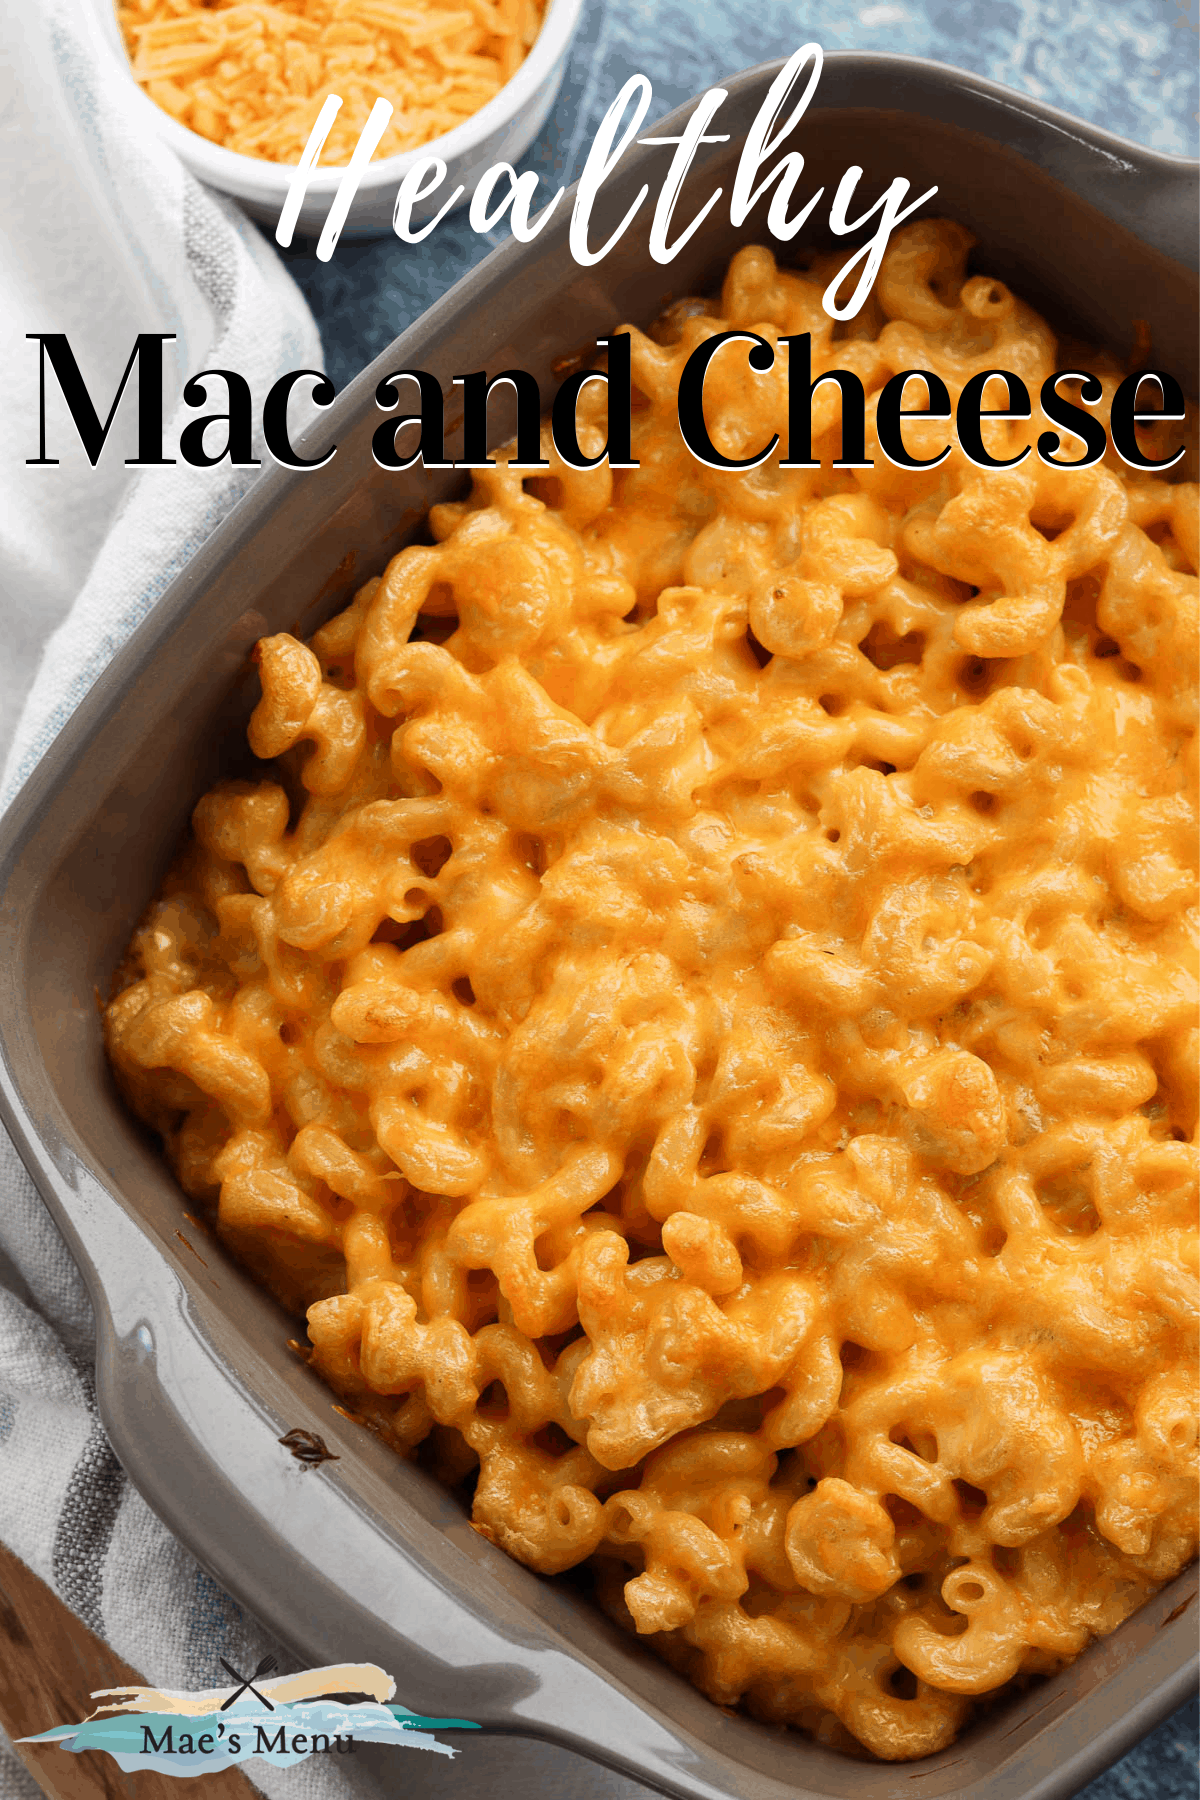 How long will mac and cheese last in the fridge Healthy Macaroni And Cheese Baked Or Stovetop Video Mae S Menu